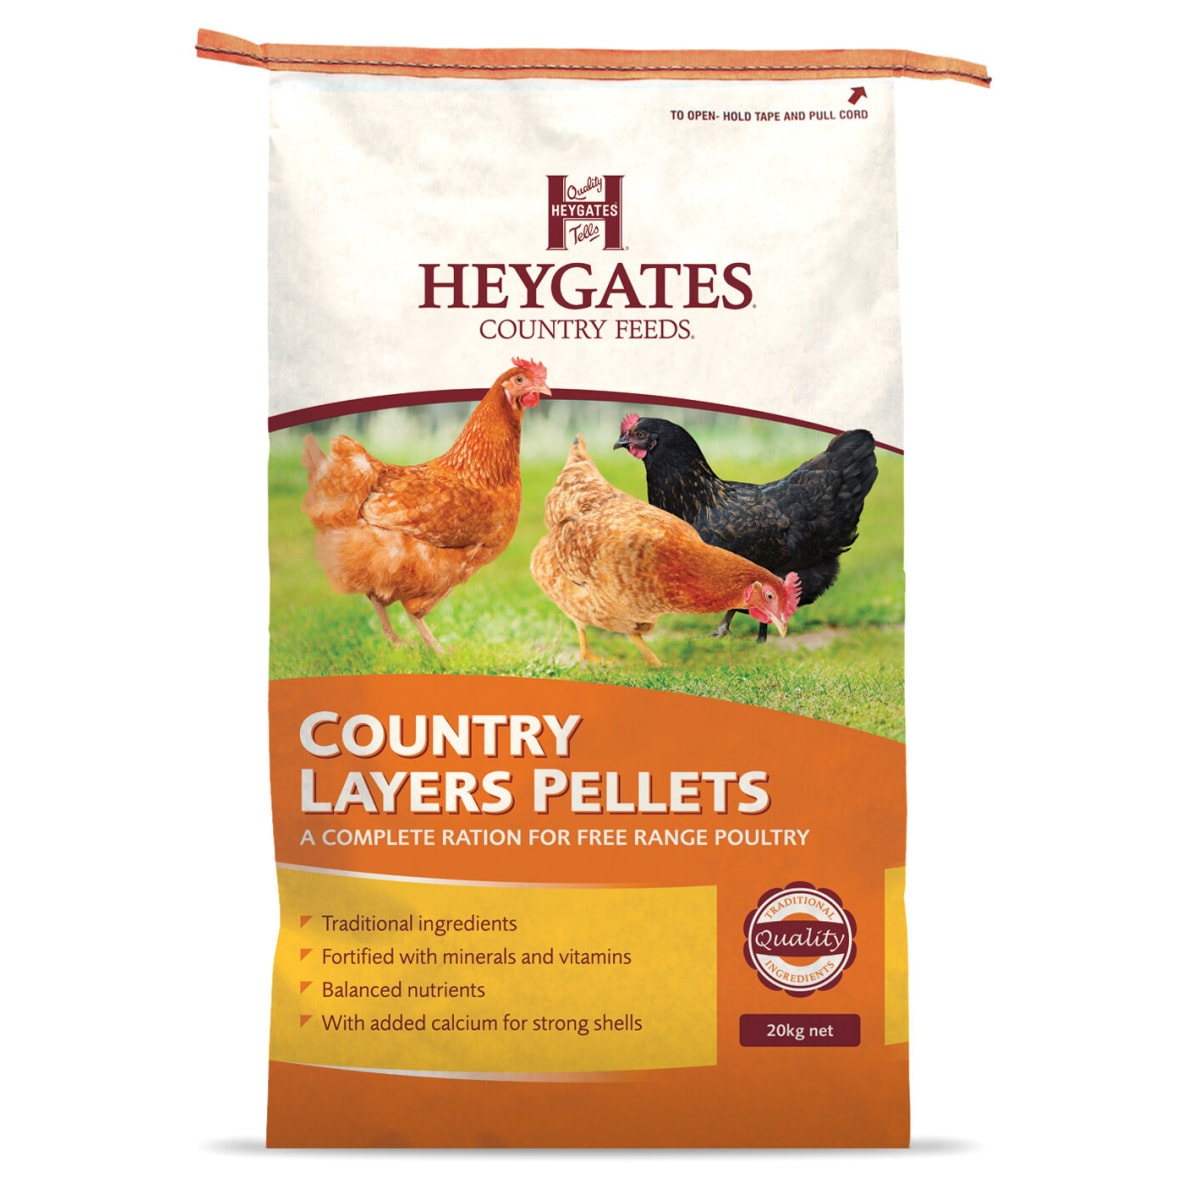 Heygates Country Layers Pellets 20kg Main Image